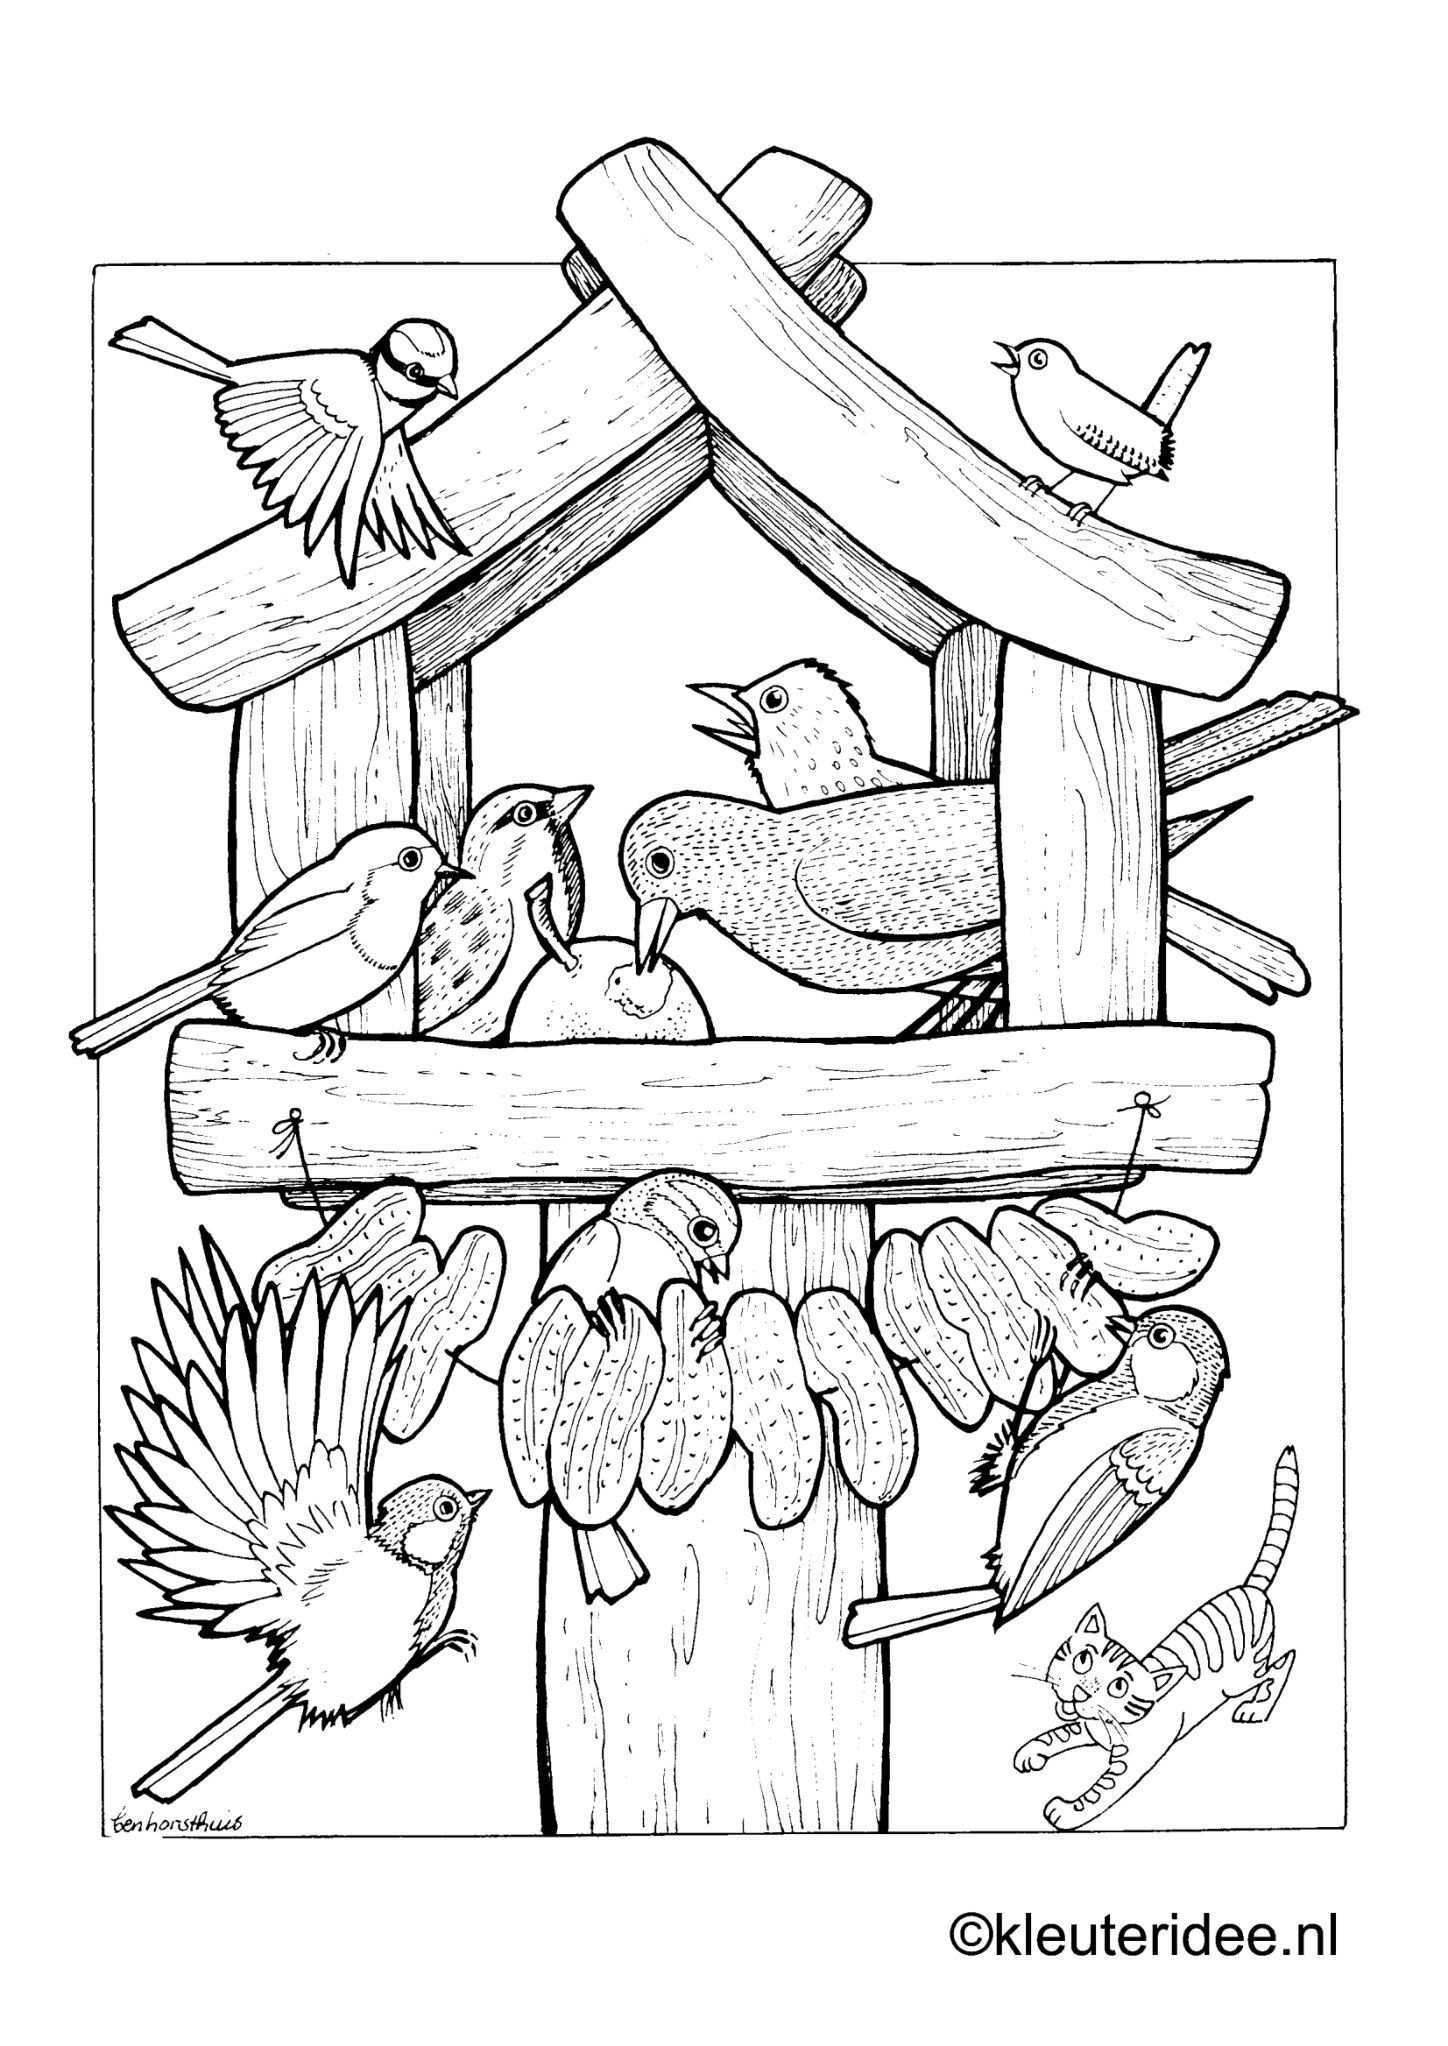 Pin By Katarzyna Pilczuk On Kleurplaten Bird Coloring Pages Bird Embroidery Pattern C